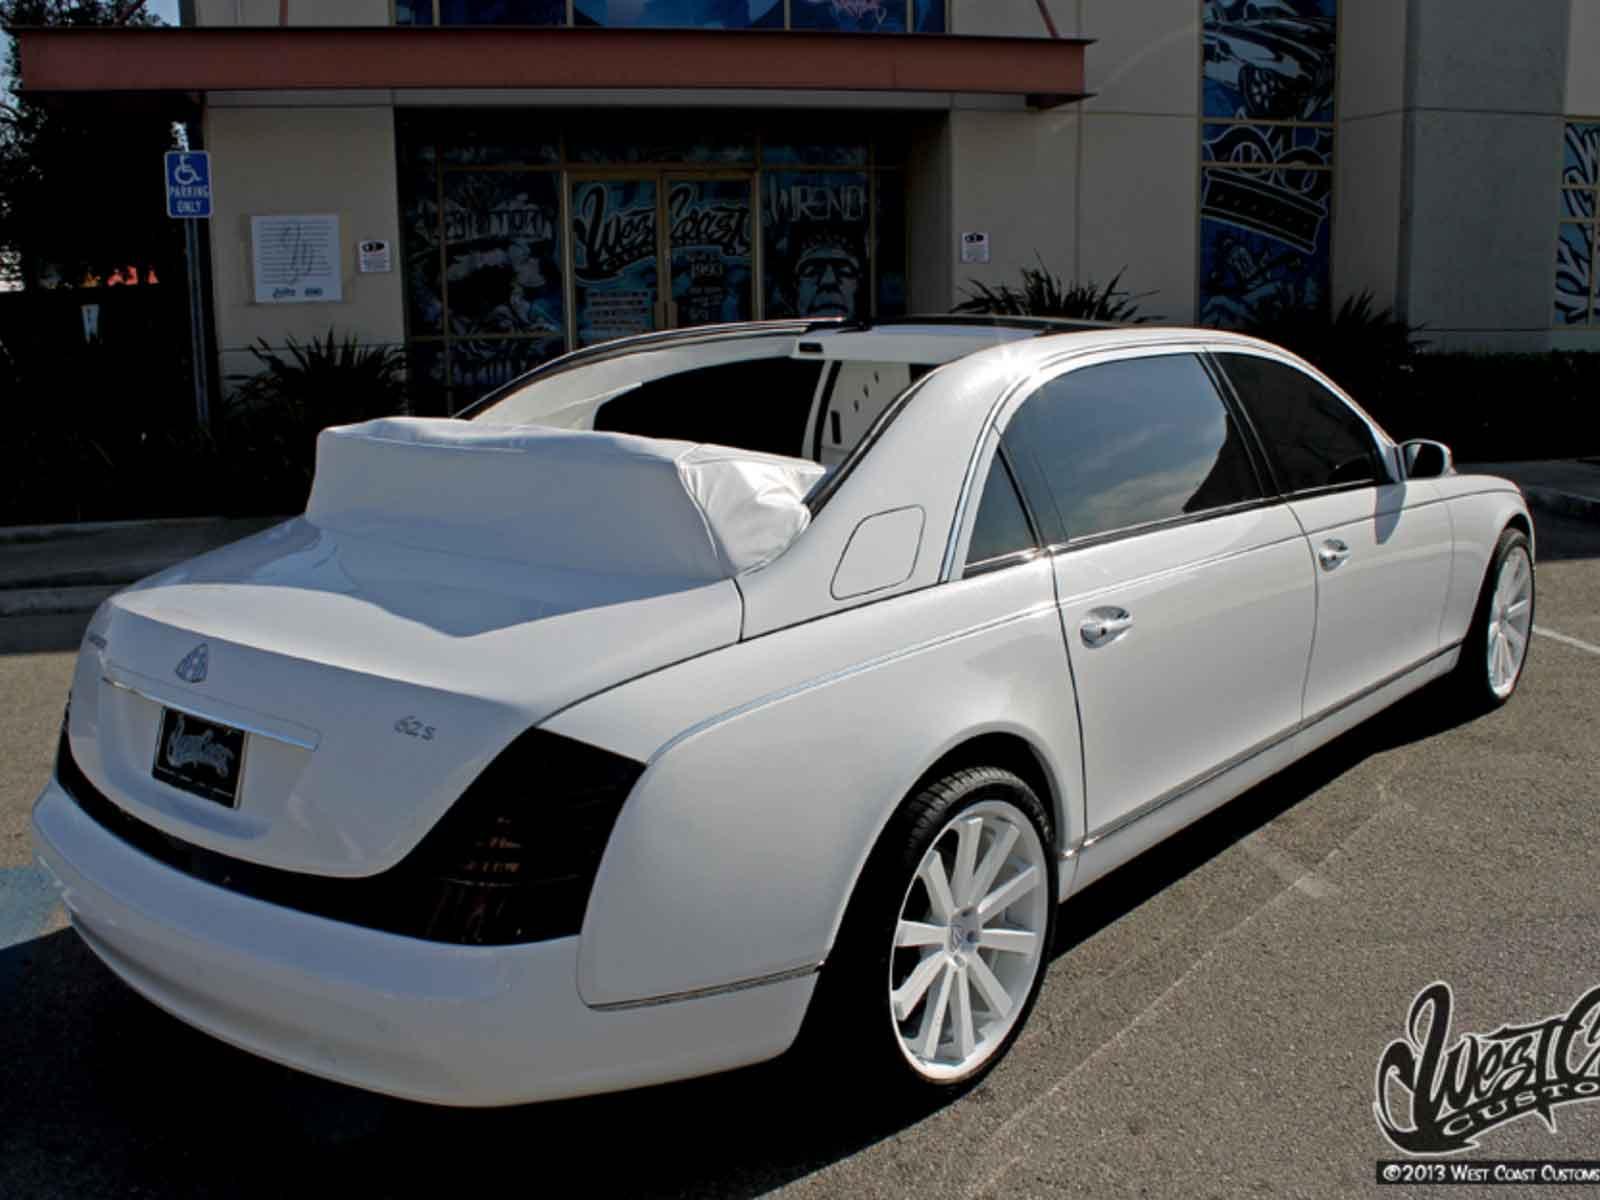 Tyga’s Custom Convertible Maybach Up for Sale to the Highest Bidder